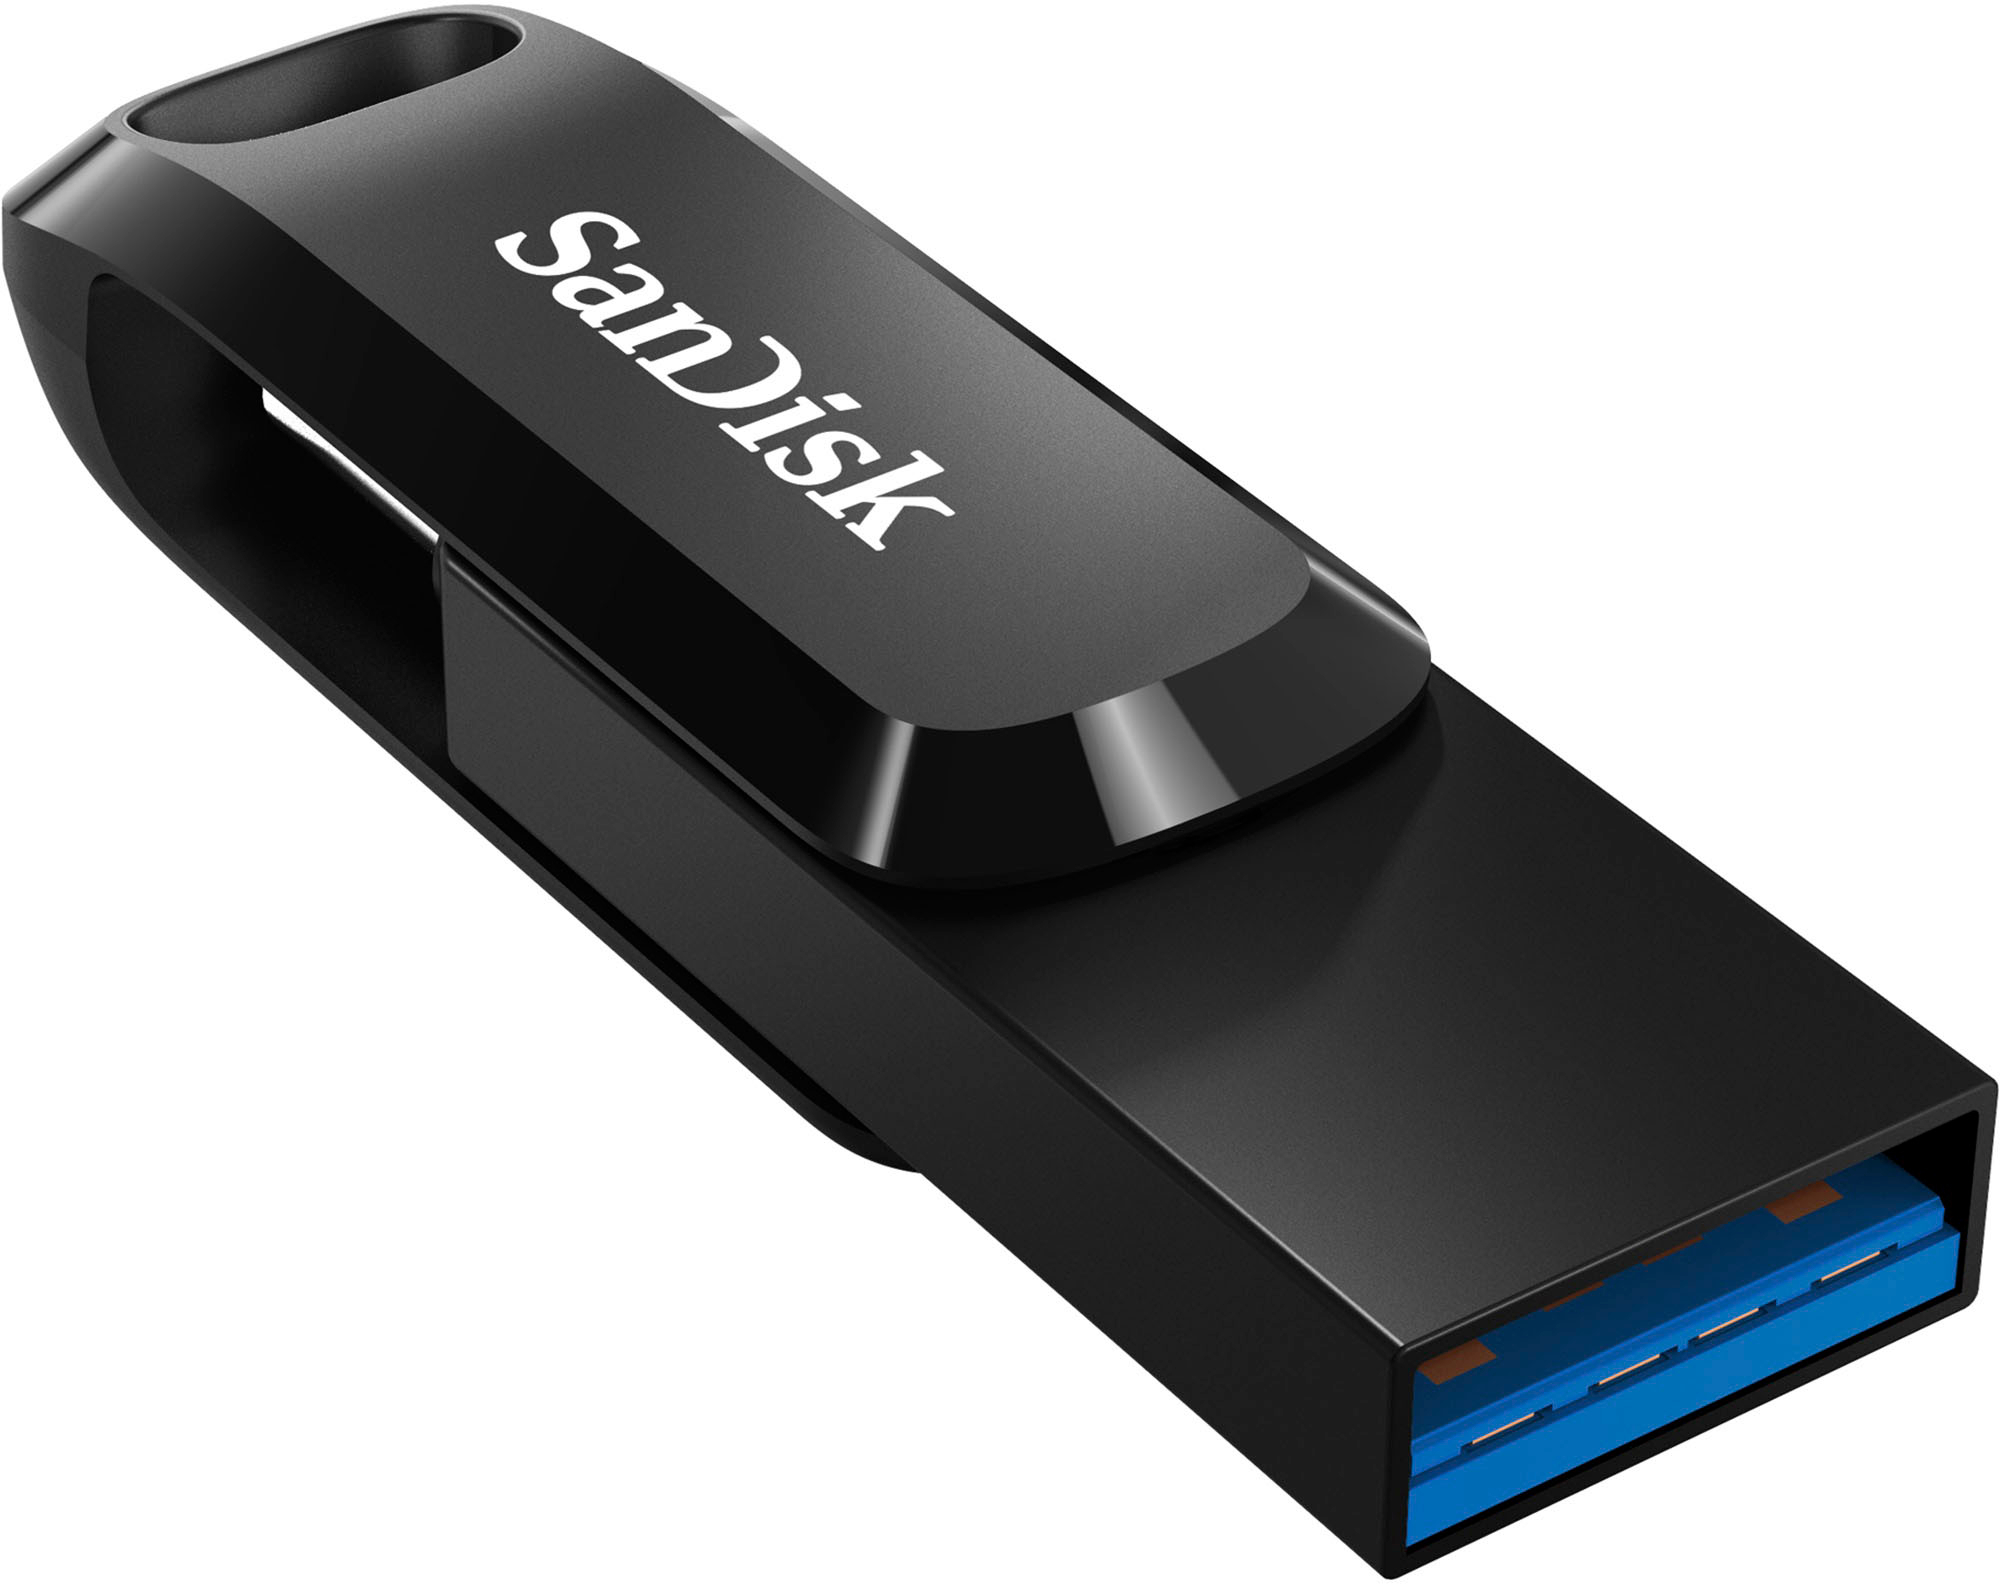 SanDisk 256GB Ultra Dual Drive m3.0 for Android Devices and Computers -  microUSB, USB 3.0 - SDDD3-256G-GAM46, Black